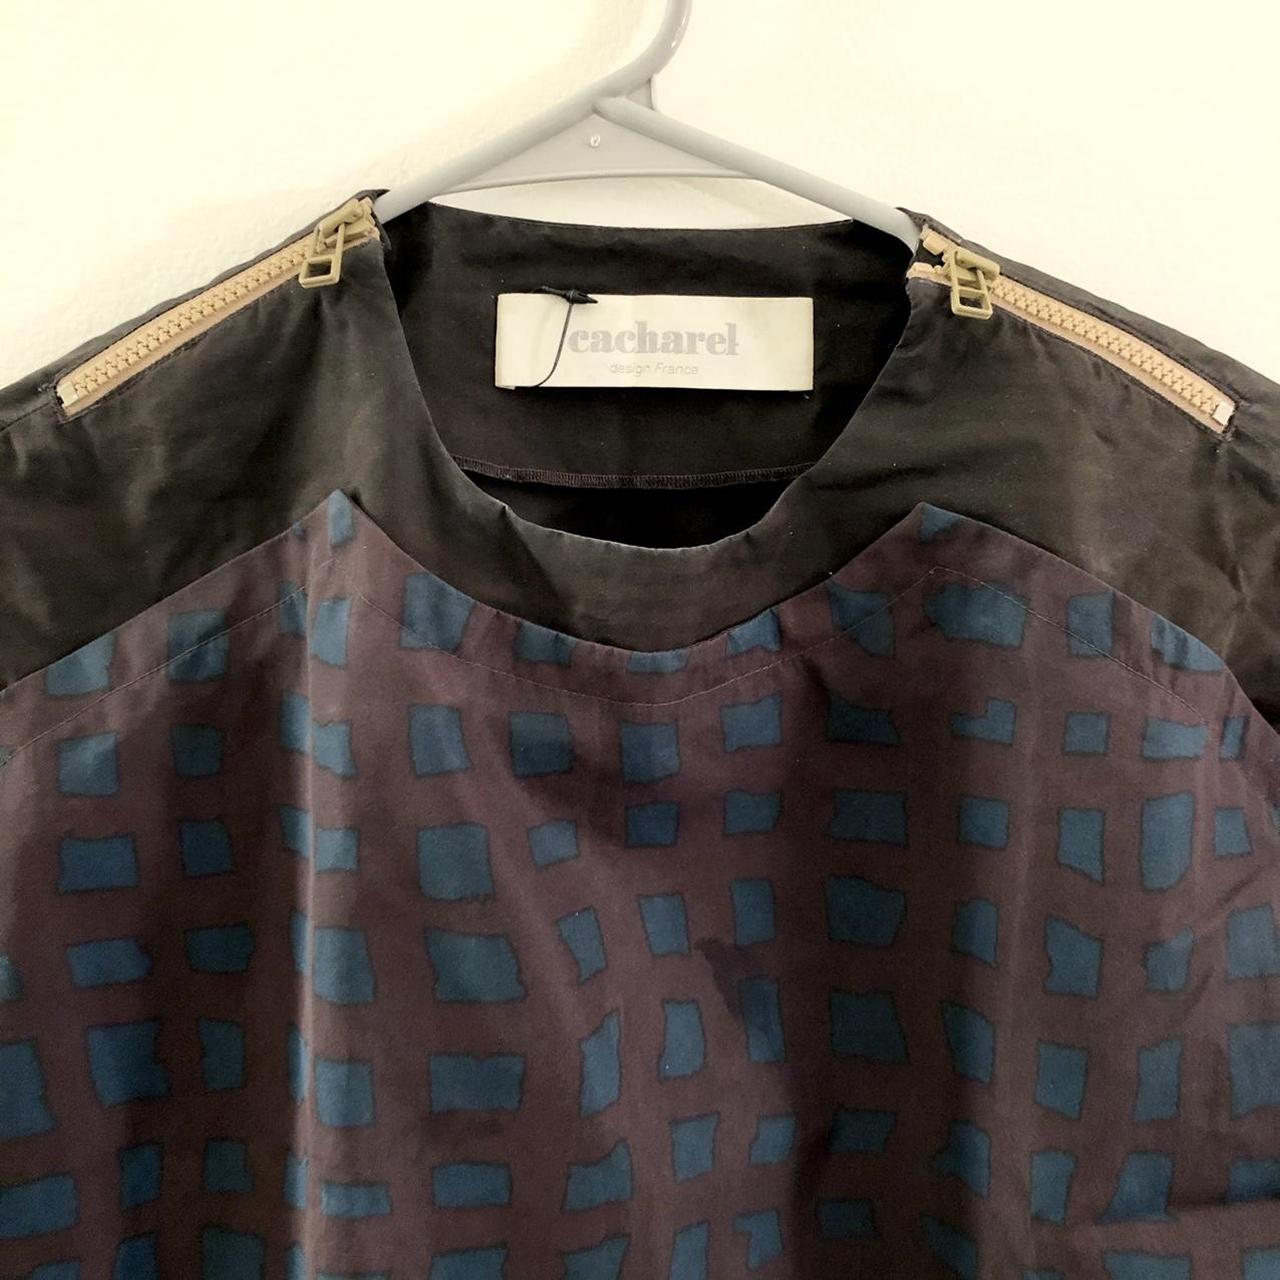 Product Image 2 - Cacharel cocoon shaped top labeled